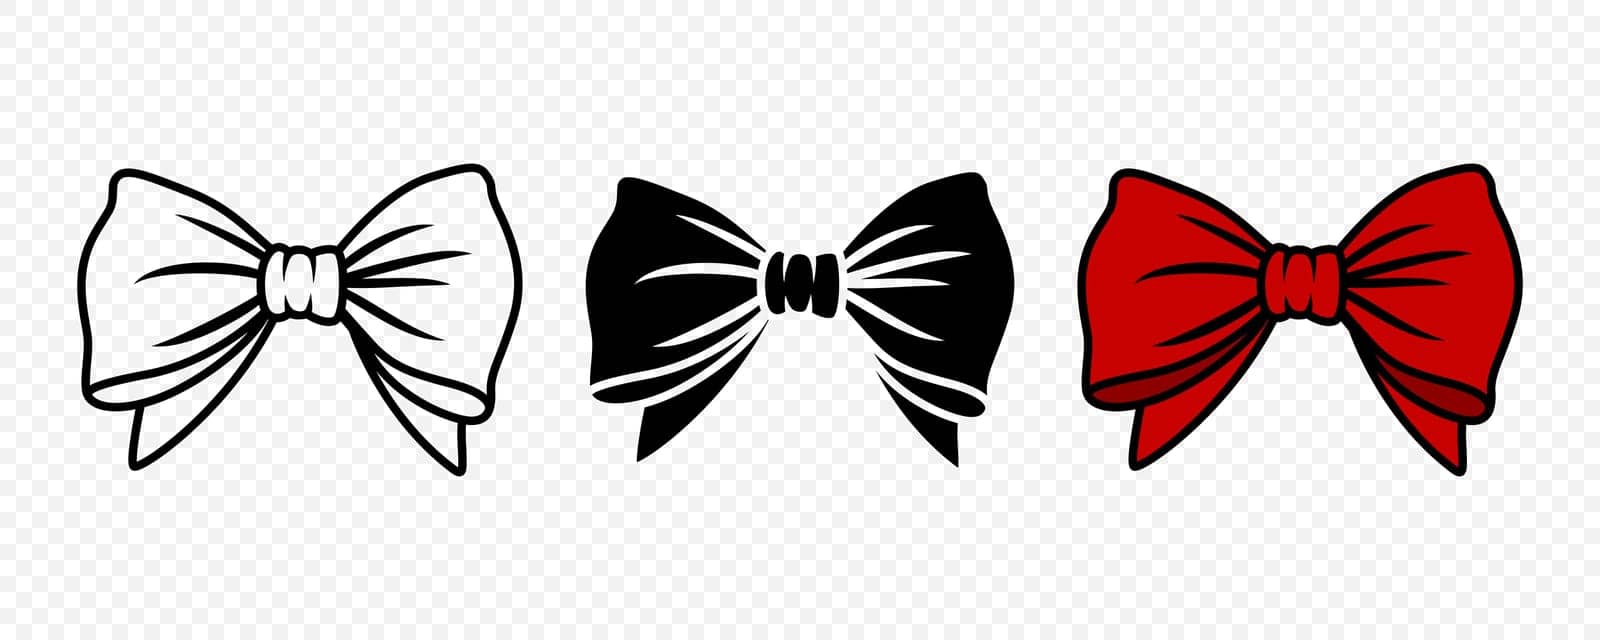 Vector Cartoon Bow Tie or Gift Bow, Cut Out and with Outline Icon Set Isolated. Bow Design Template.